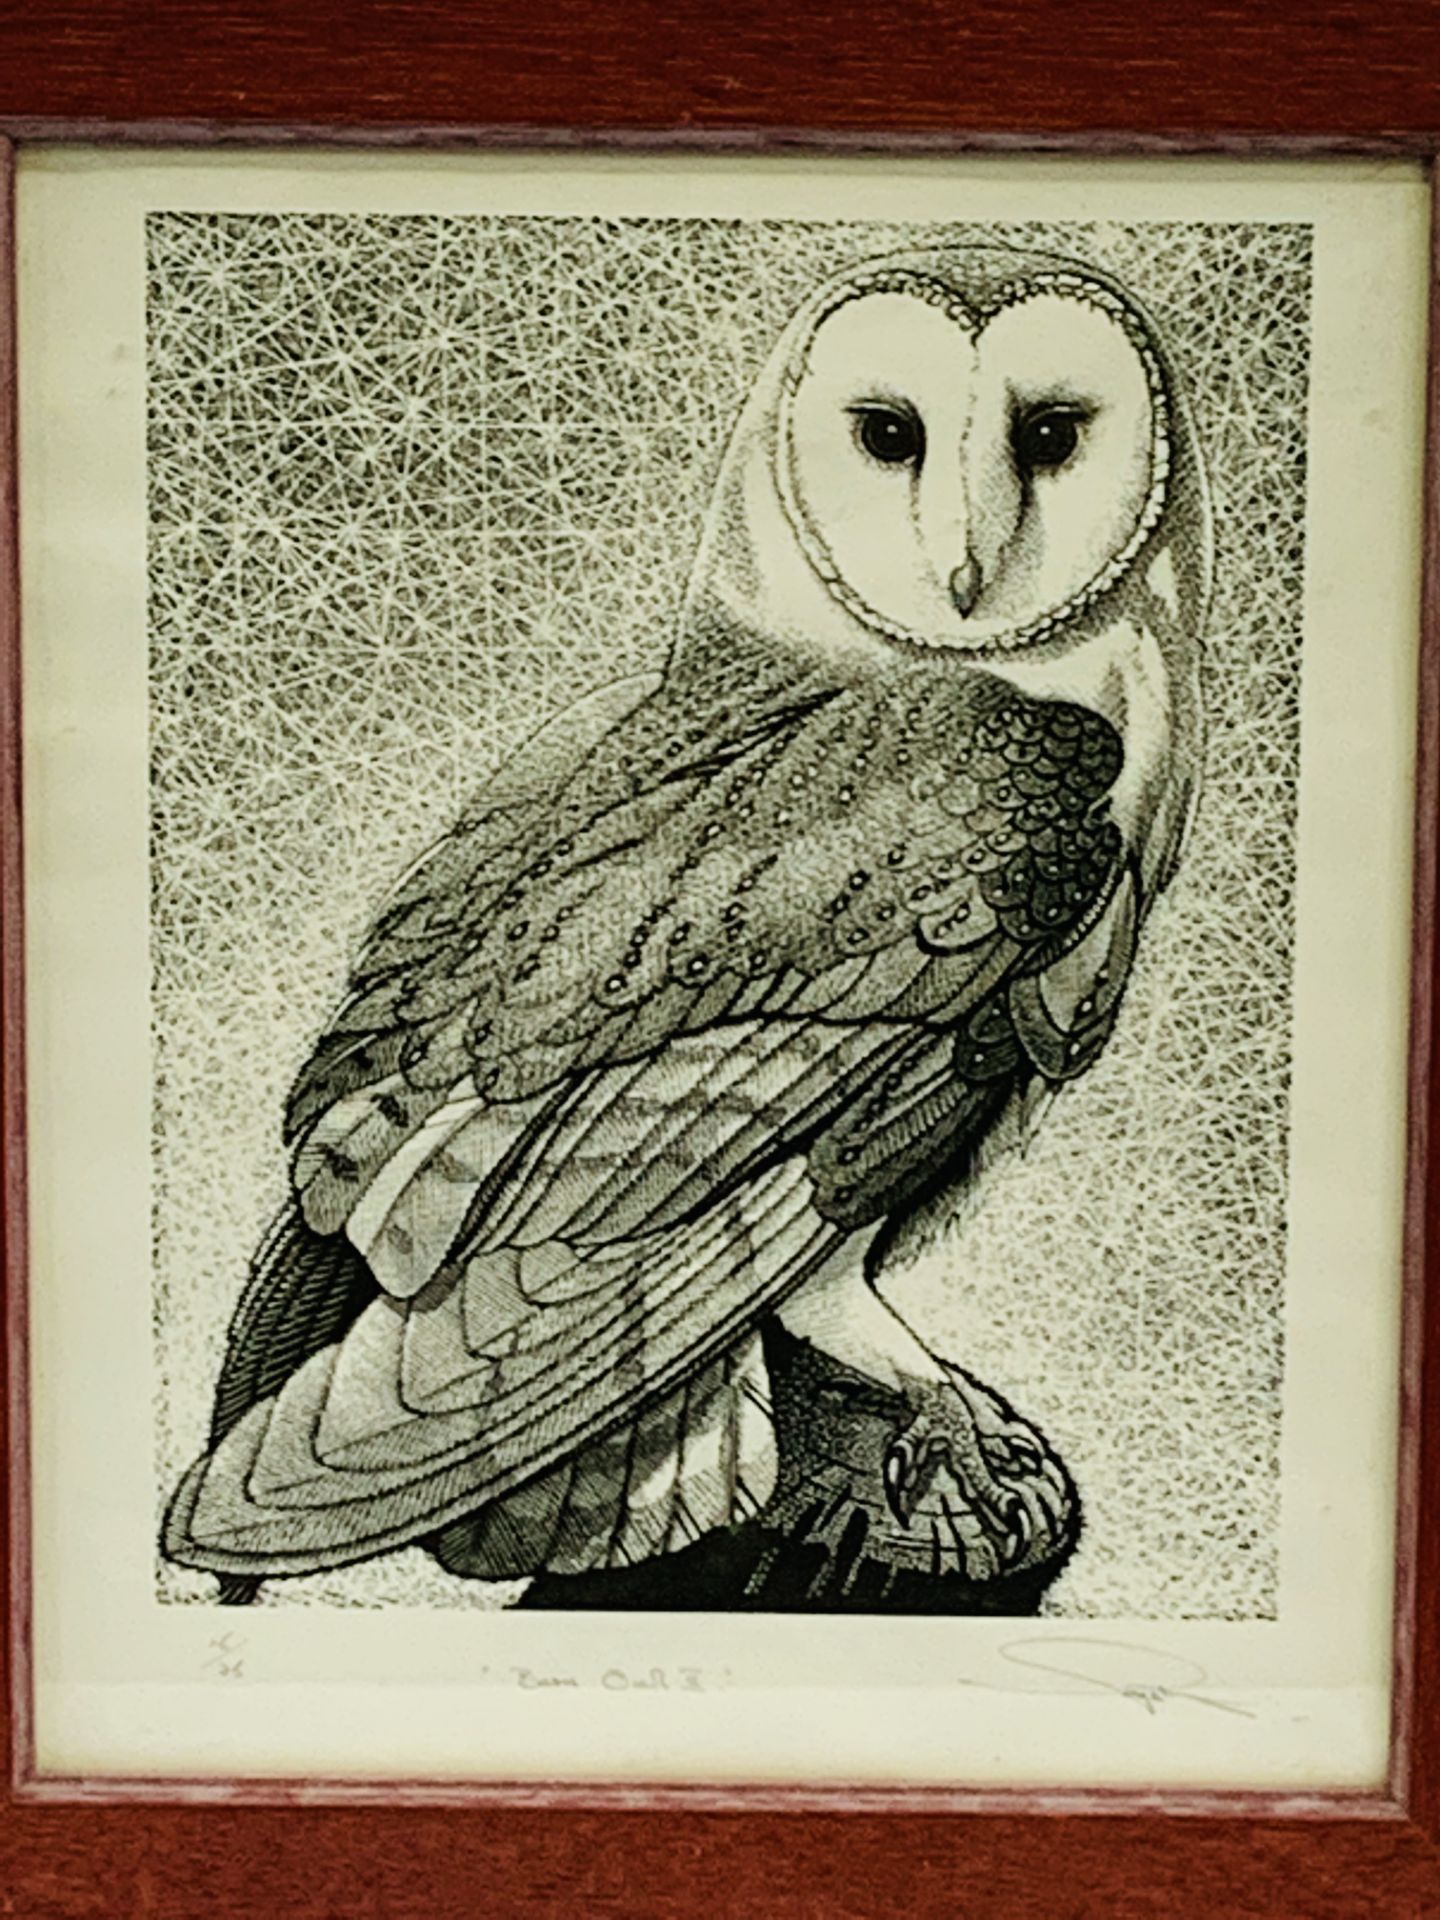 Watercolour and embroidery "Fledgling Barn Owls" by Cathy Silvester, and a print "Barn Owl II", - Image 2 of 2